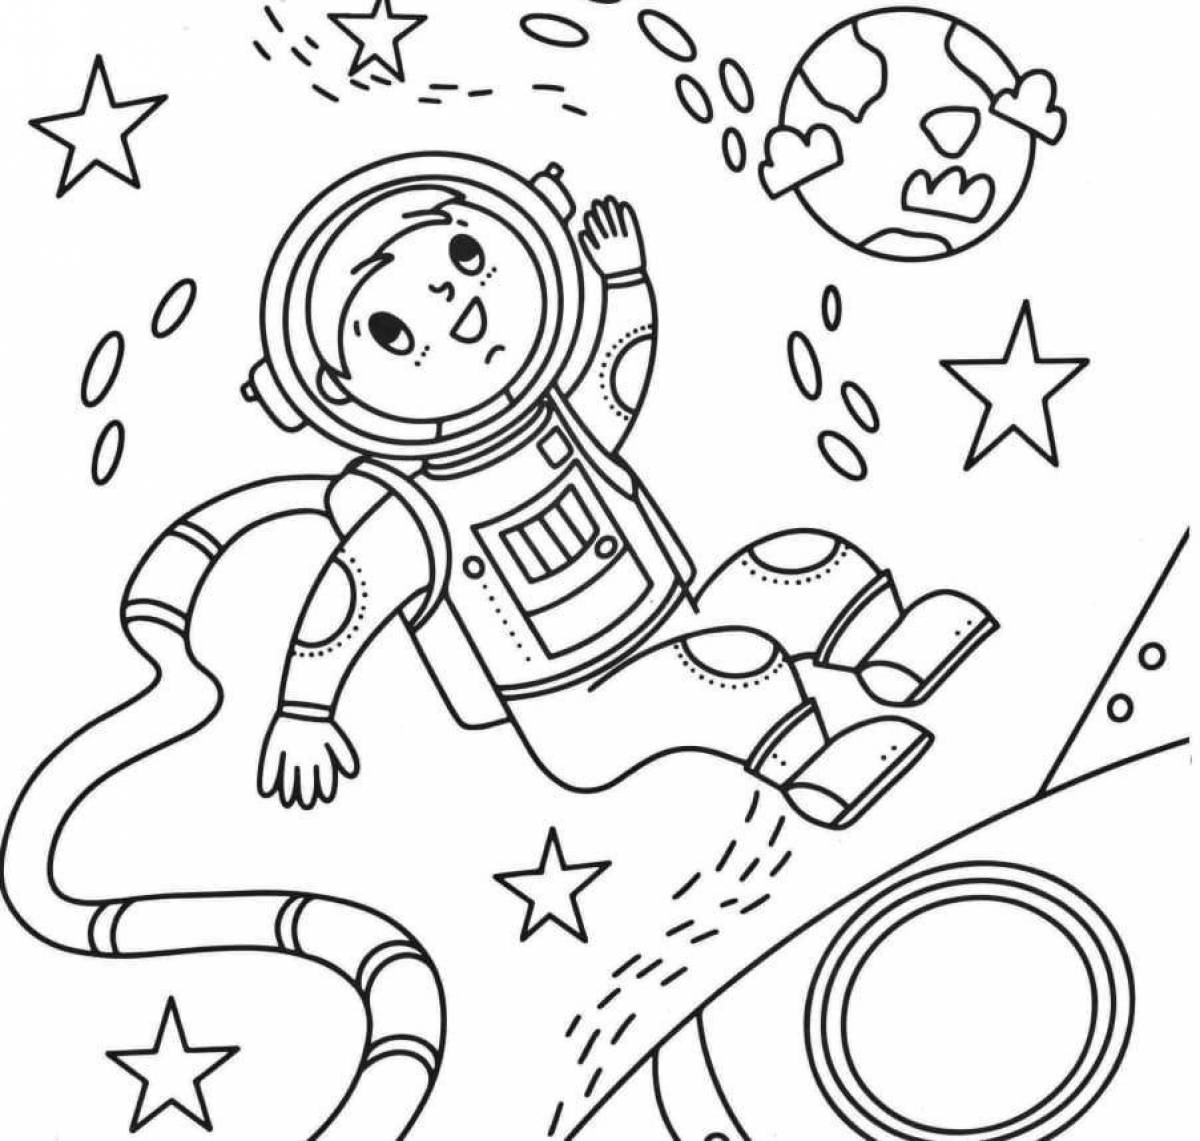 Great space coloring book for 6-7 year olds